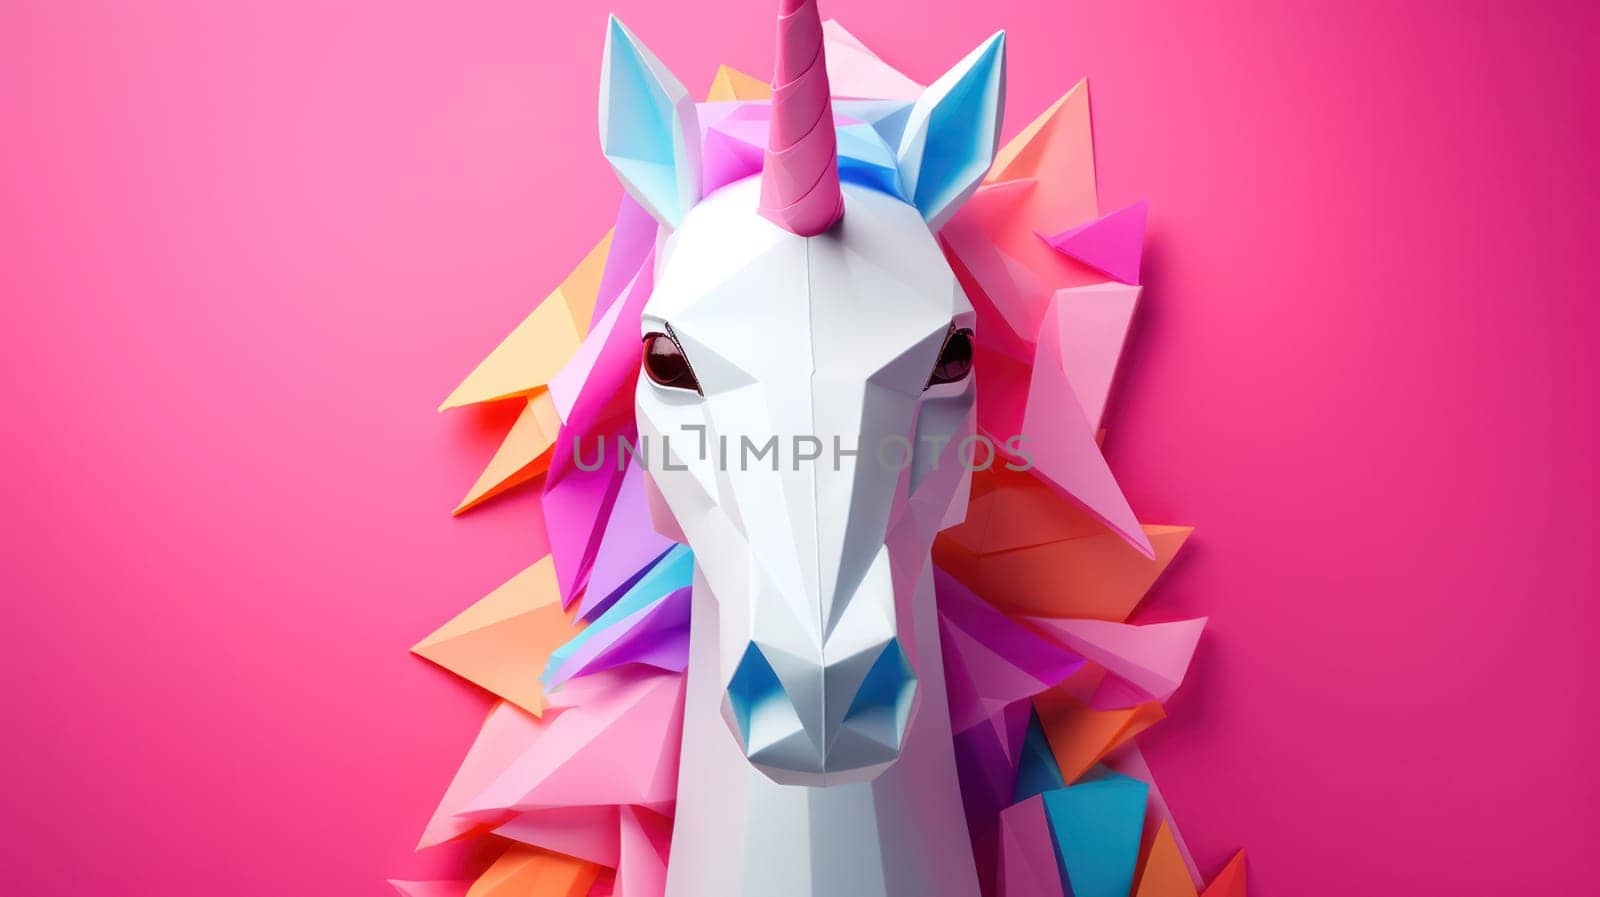 Whimsical Unicorn: A Playful, Colorful, and Magical Creature with a Geometric Pink and White Origami Paper Design on a Bright Blue Background by Vichizh